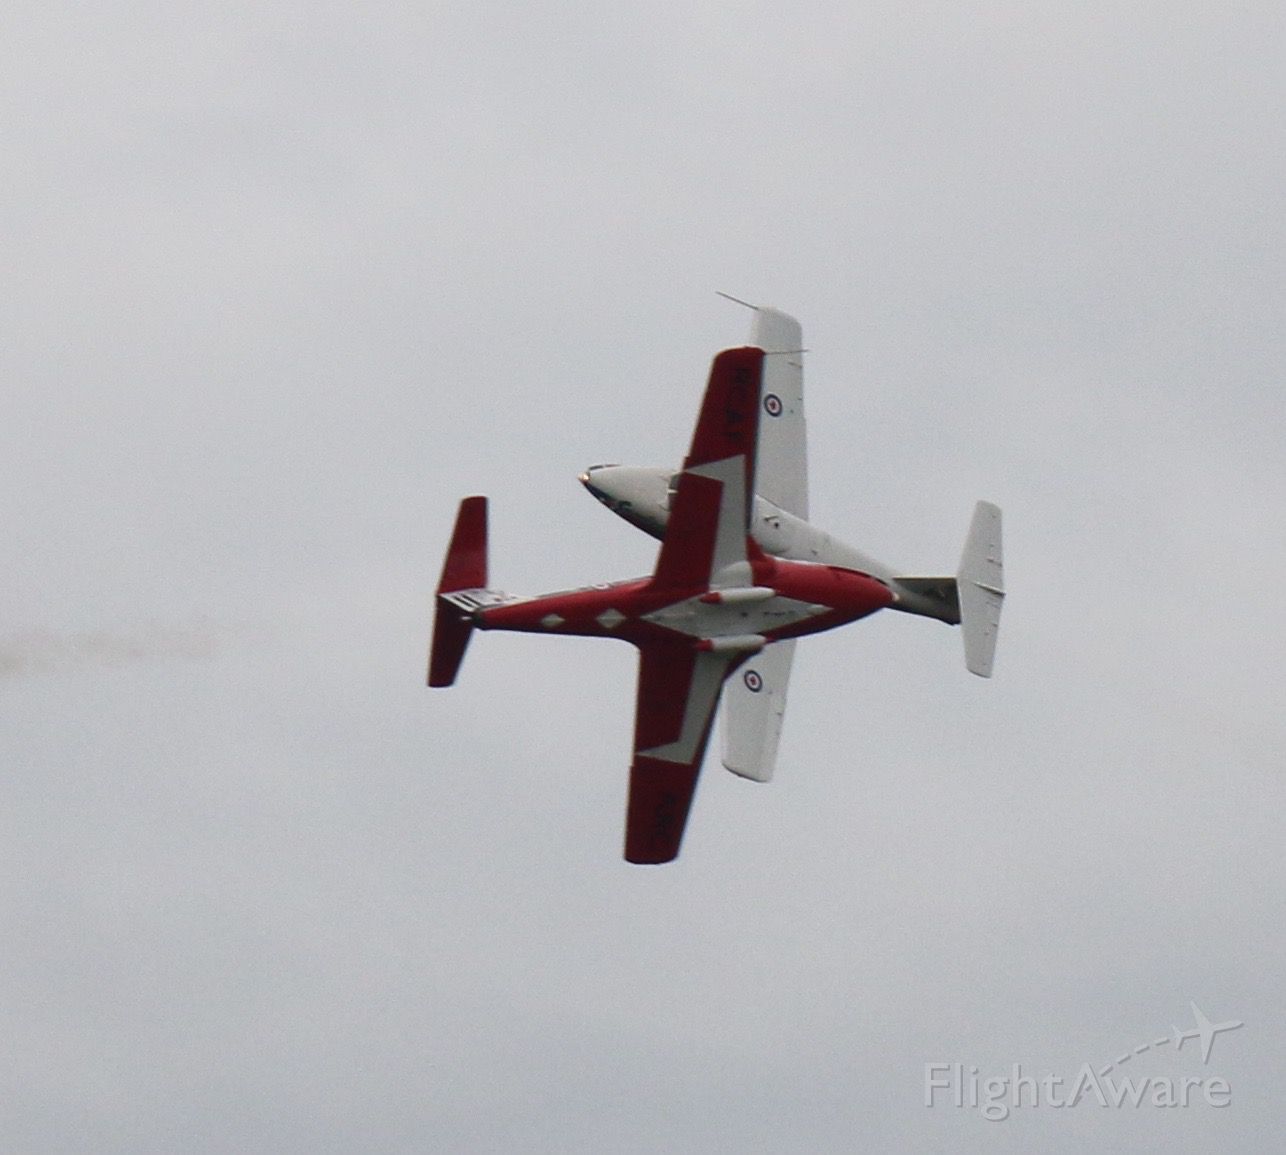 — — - The RCAF Snowbirds perform at an airshow in Gatineau, Que. on Sept. 19, 2015.